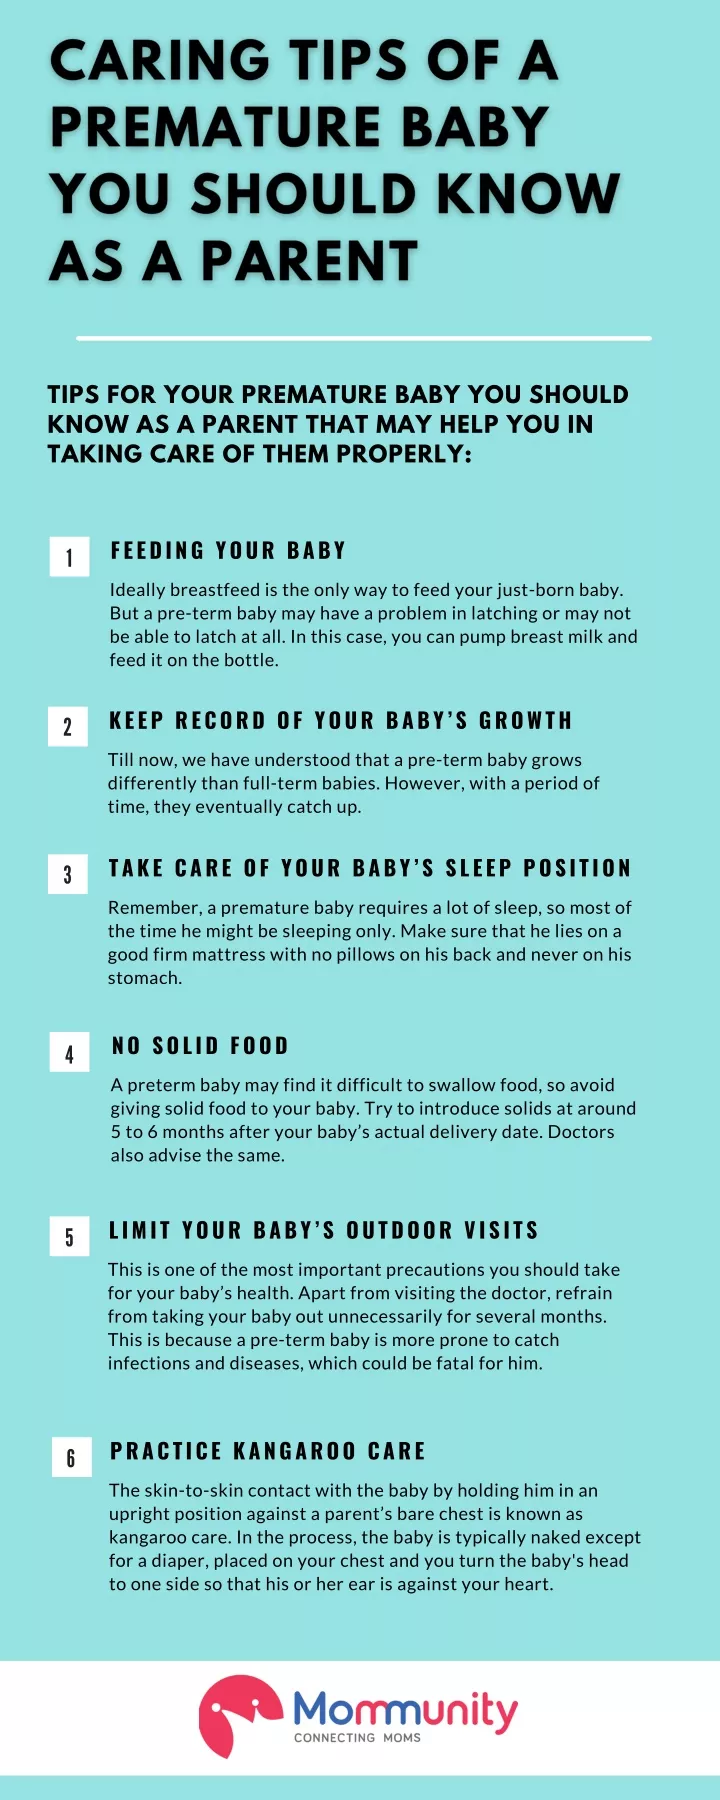 tips for your premature baby you should know